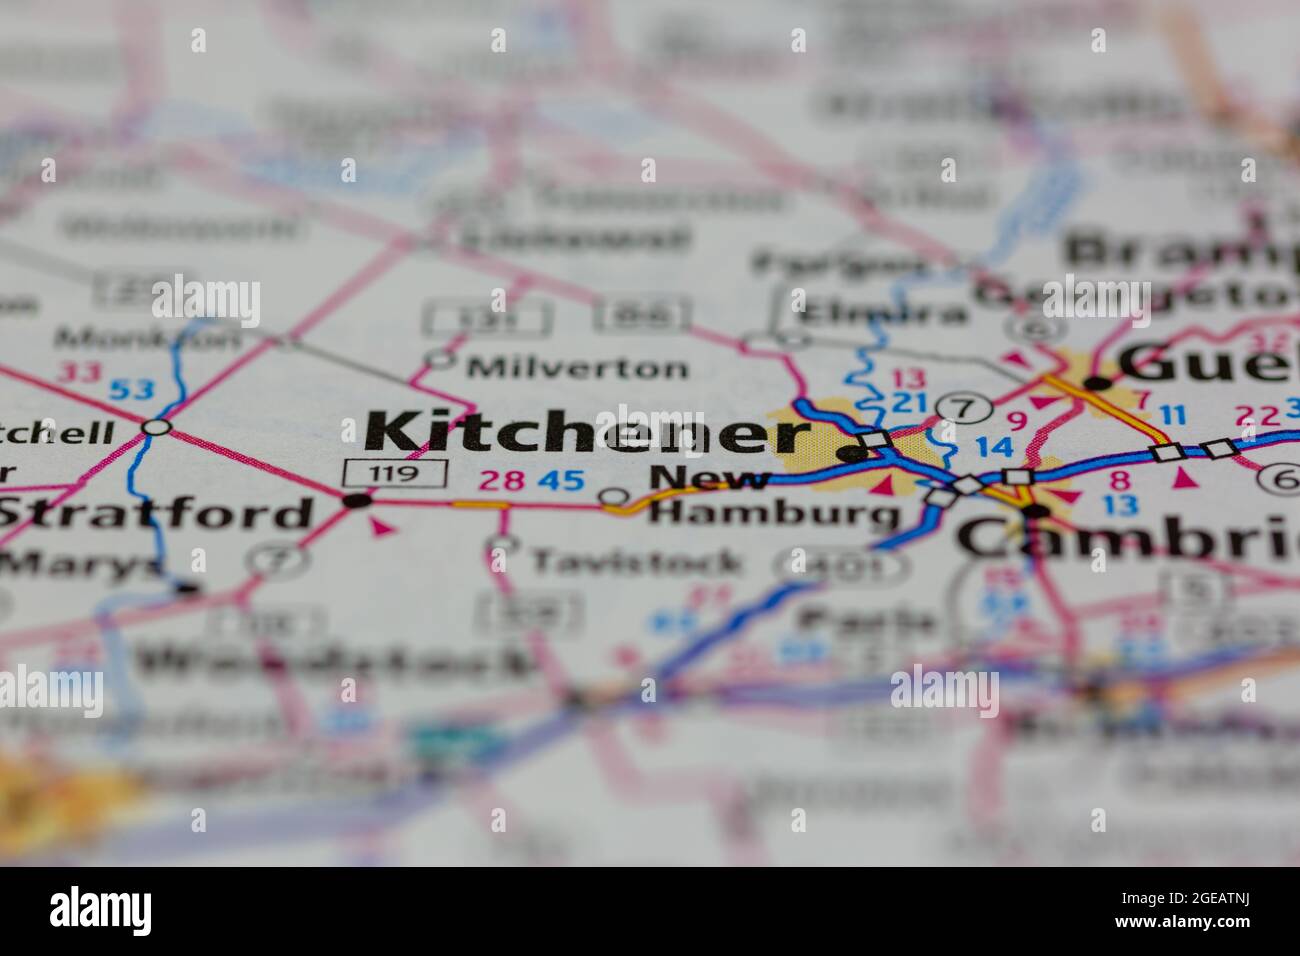 Kitchener Ontario Canada Shown On A Road Map Or Geography Map 2GEATNJ 